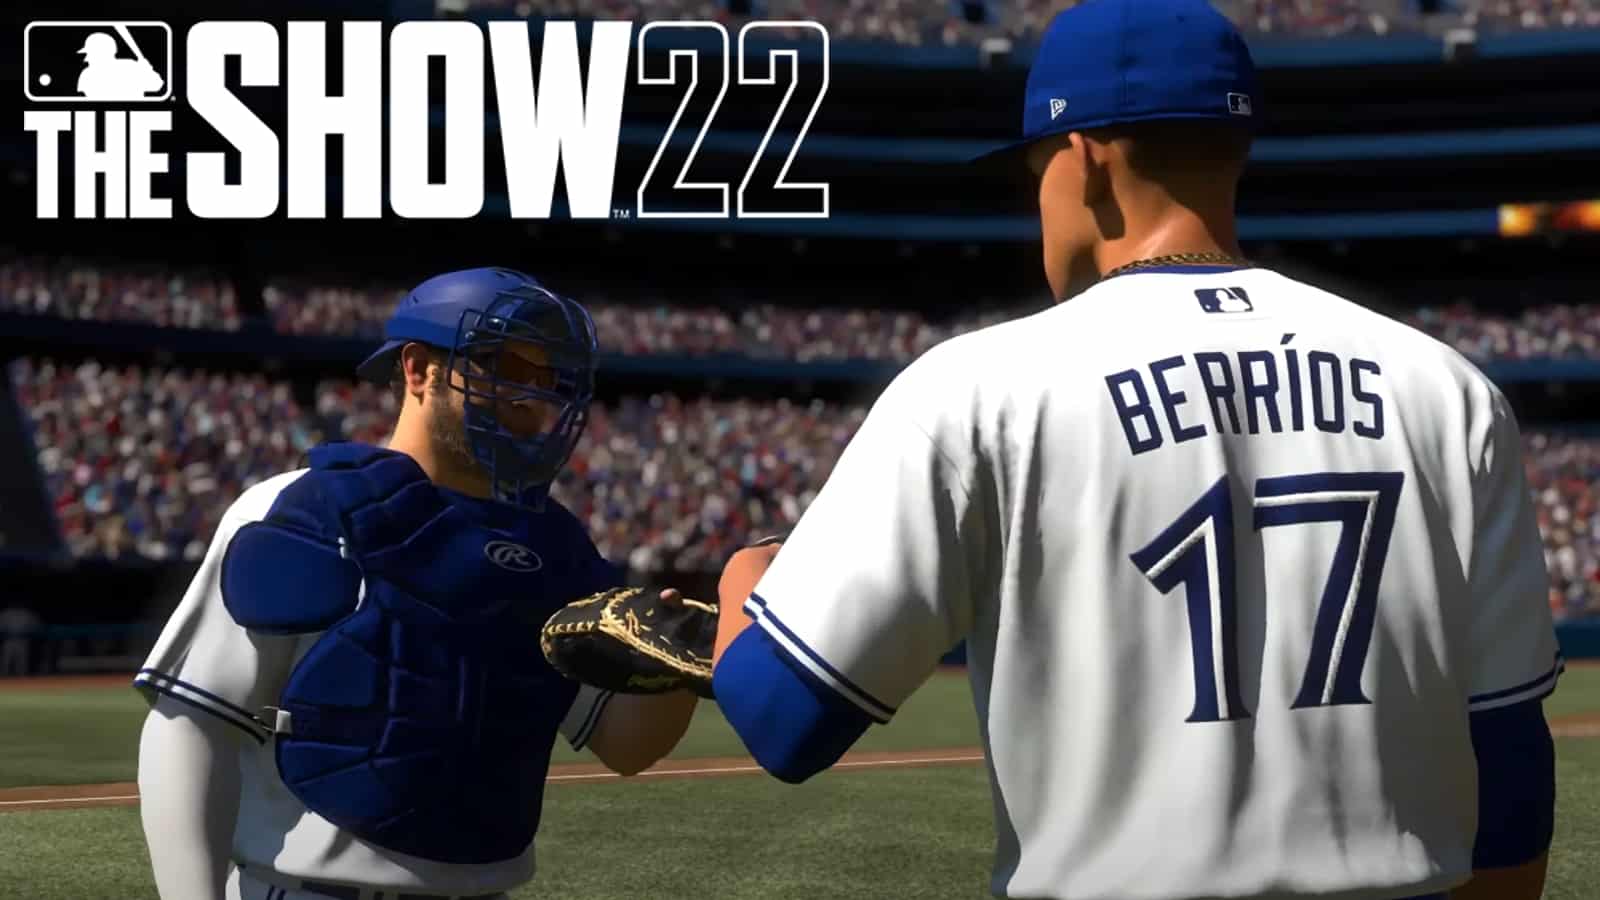 MLB The Show 22: Release date, trailer, gameplay & platforms - Dexerto